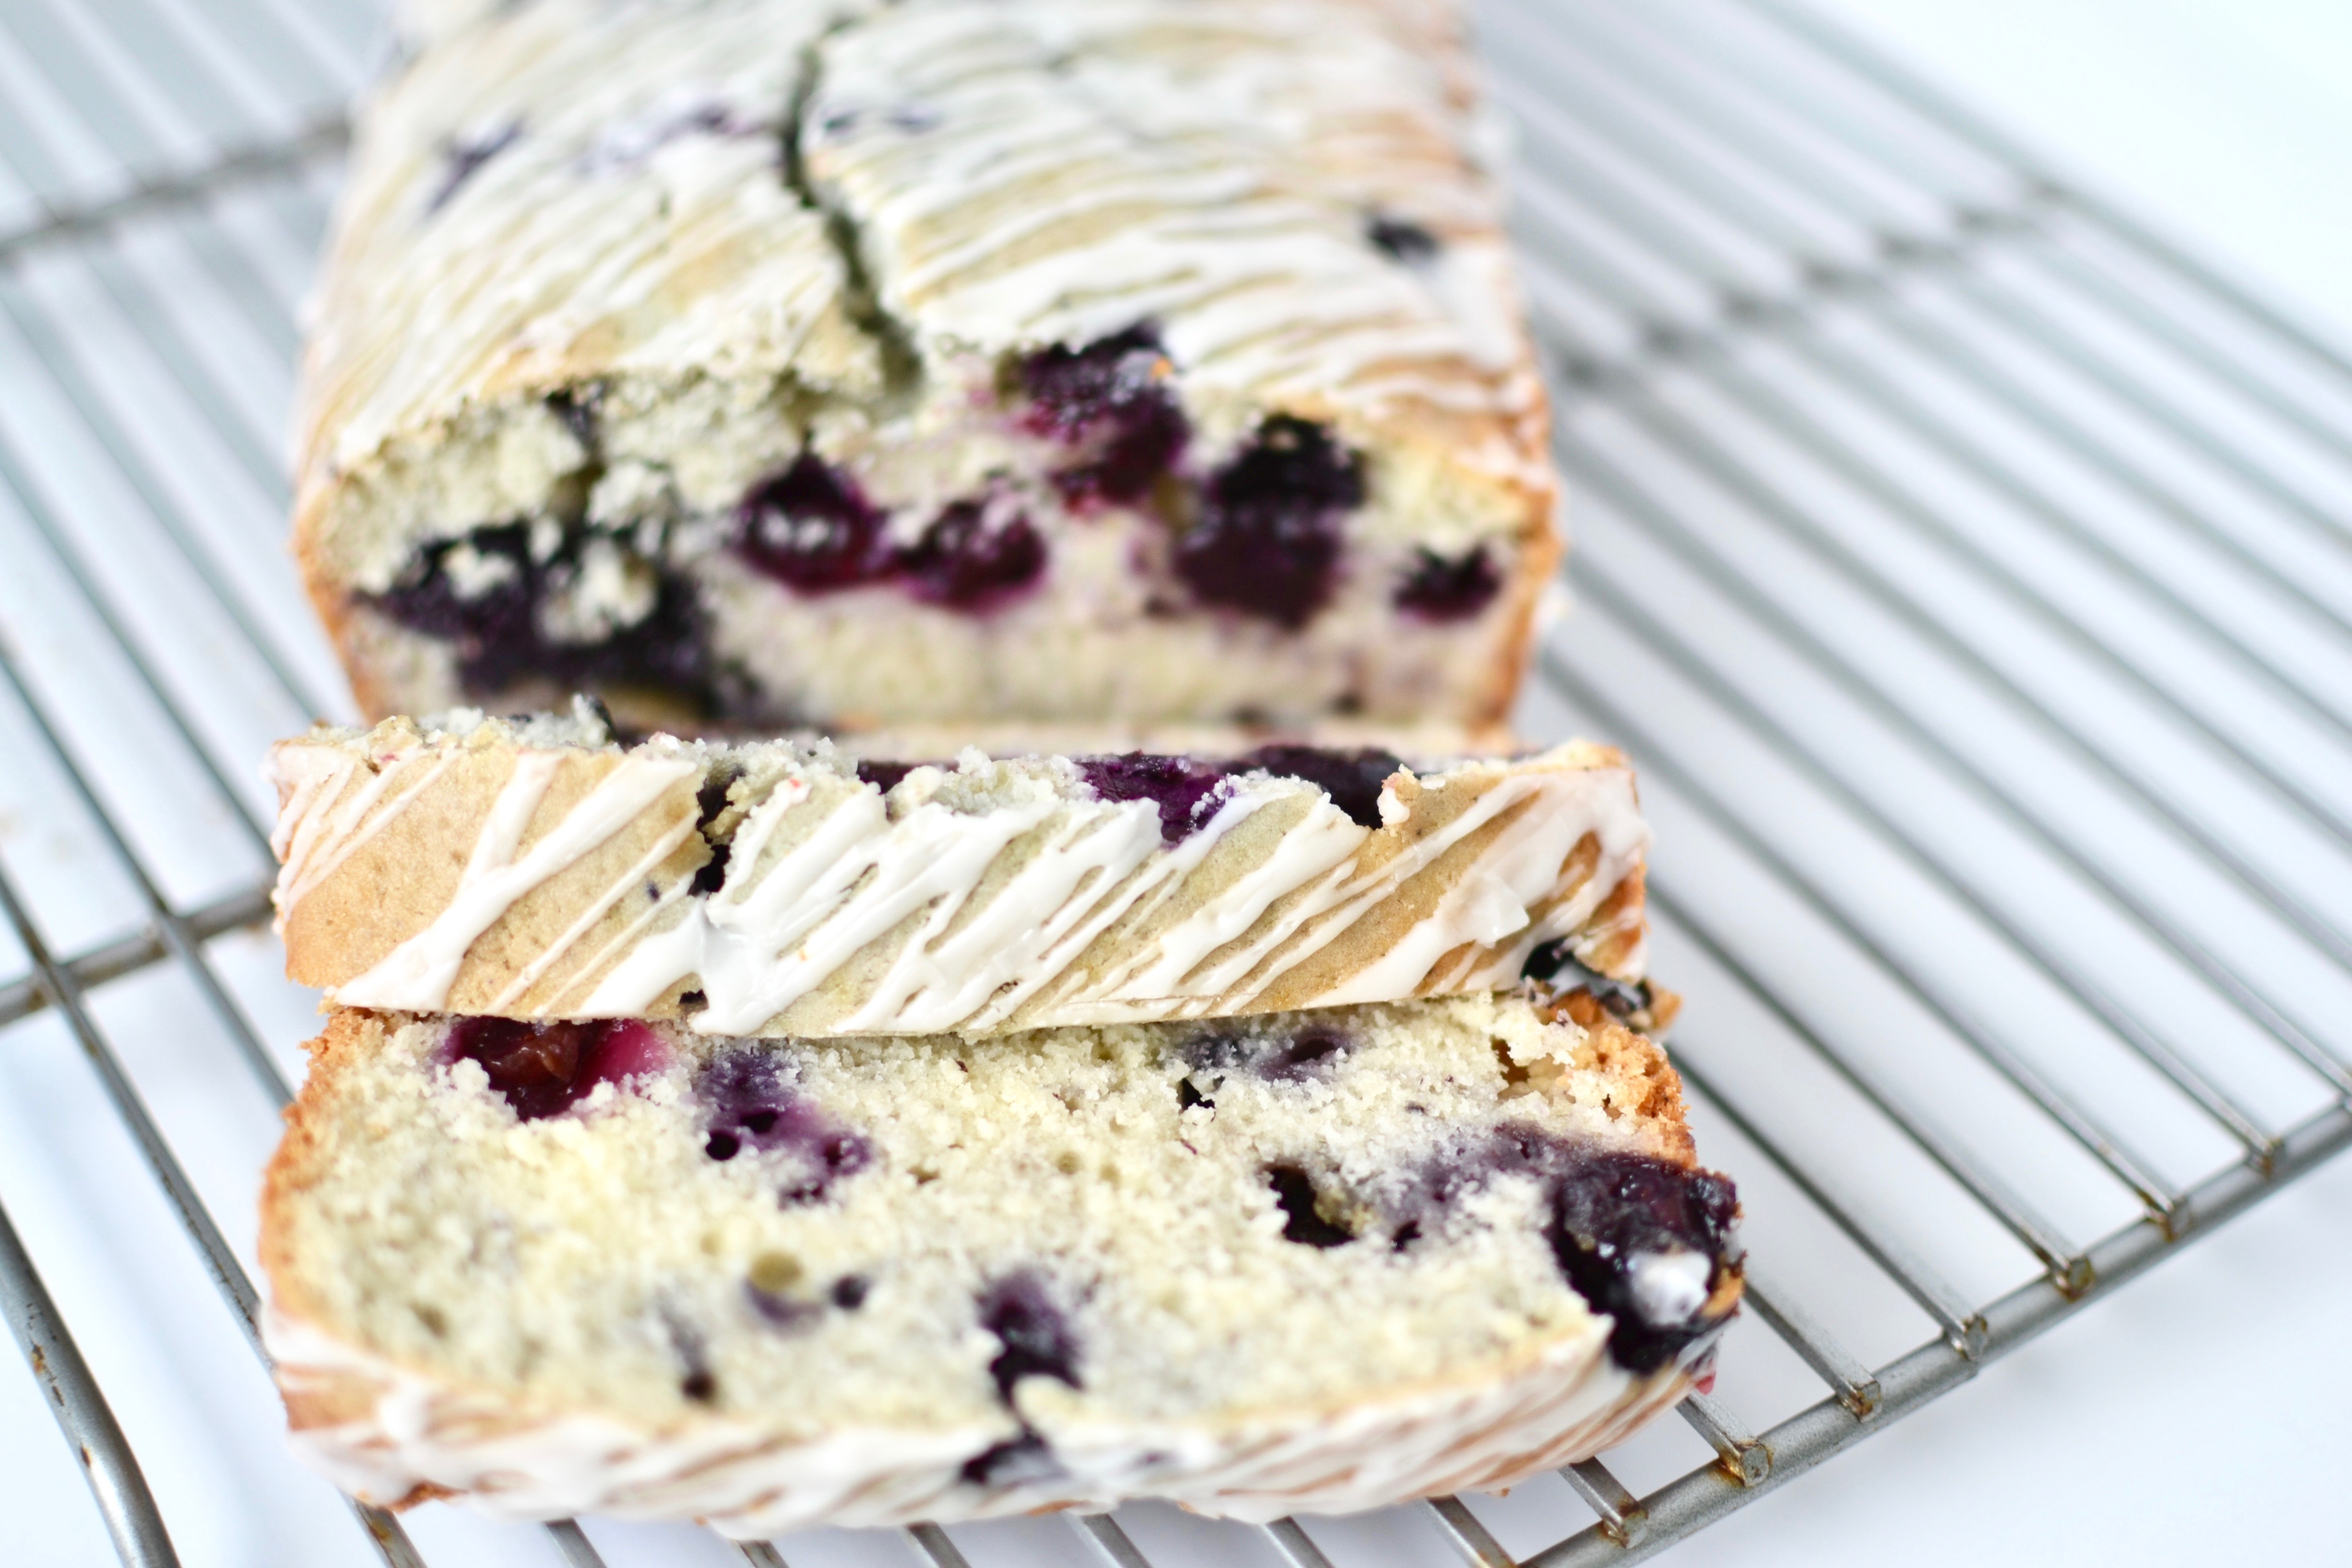 This delicious blueberry bread is super easy to make! Check out thenewlywedchefs.com for the recipe!